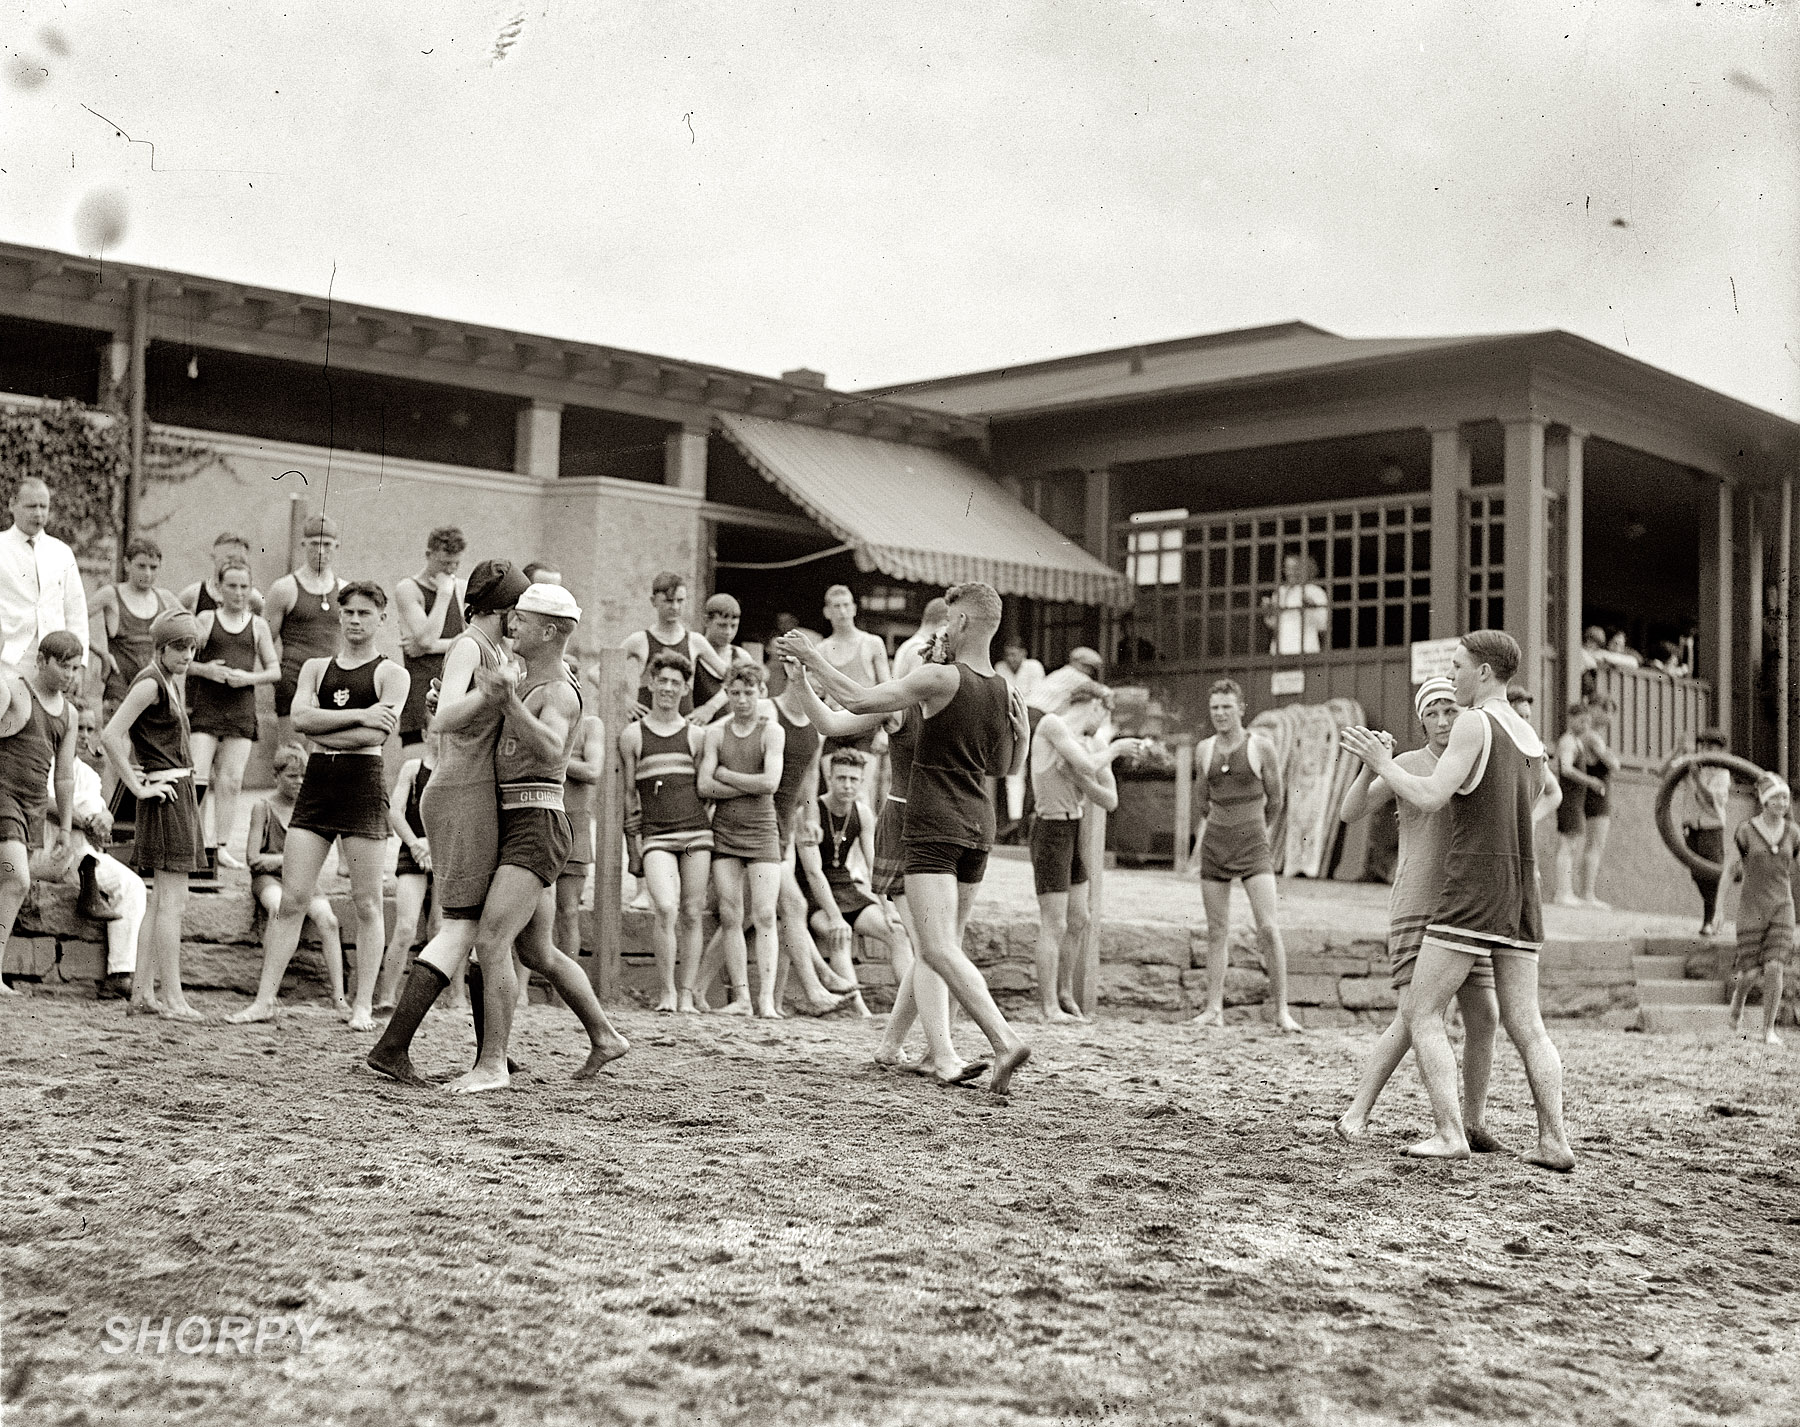 July 6, 1922. "People dancing on beach." Pavilion at the Potomac bathing beach in Washington. View full size. National Photo Company Collection glass negative.